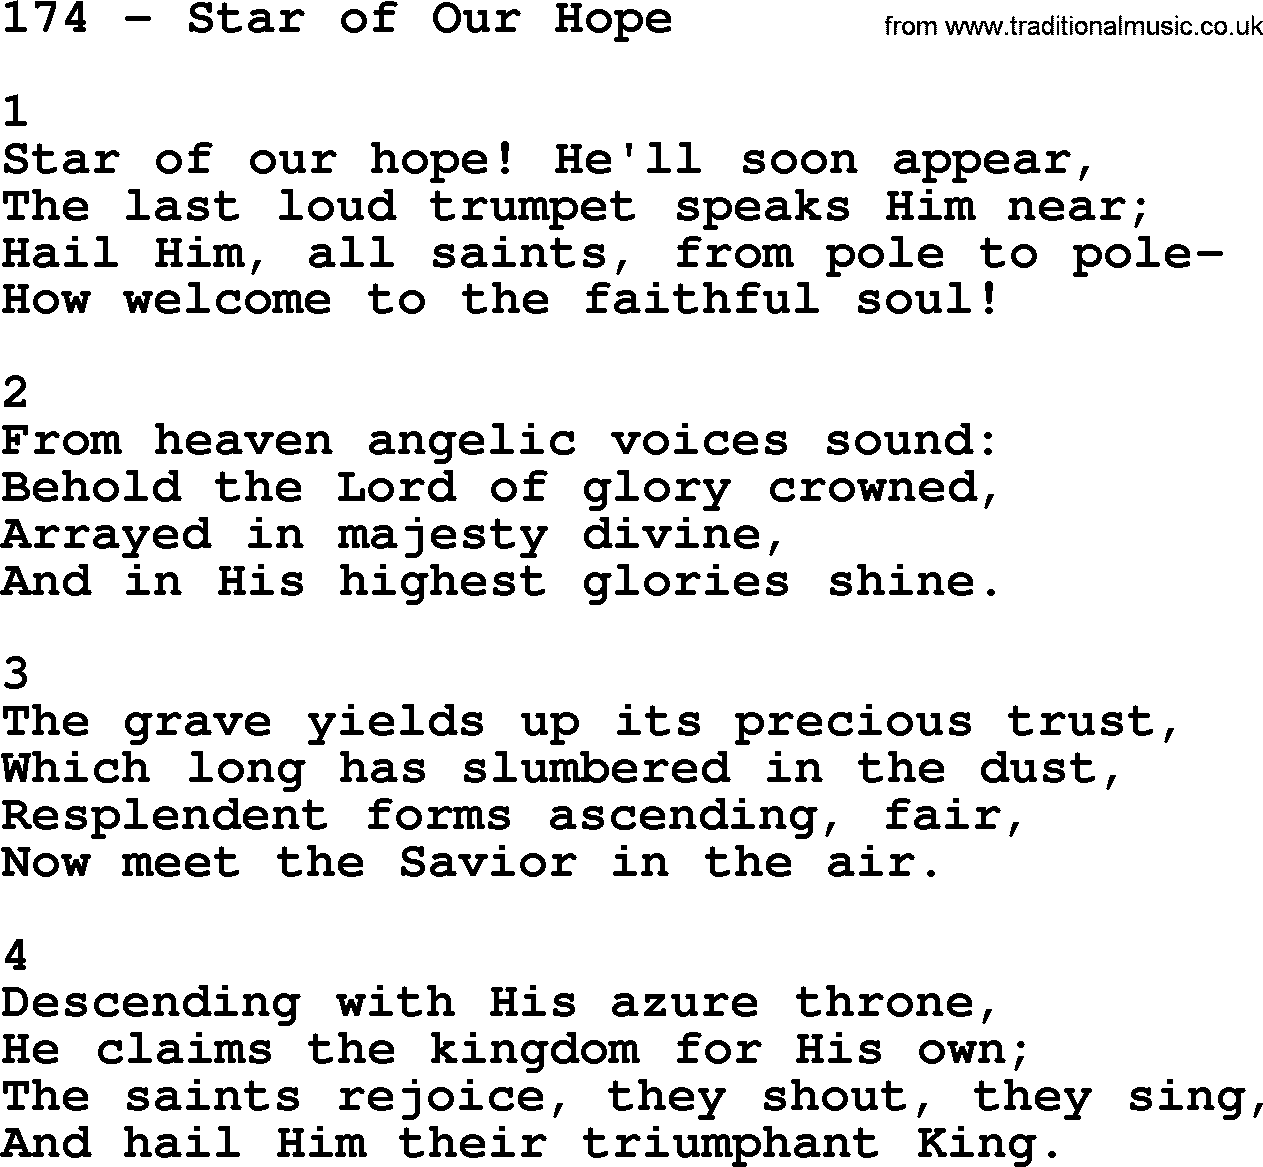 Complete Adventis Hymnal, title: 174-Star Of Our Hope, with lyrics, midi, mp3, powerpoints(PPT) and PDF,